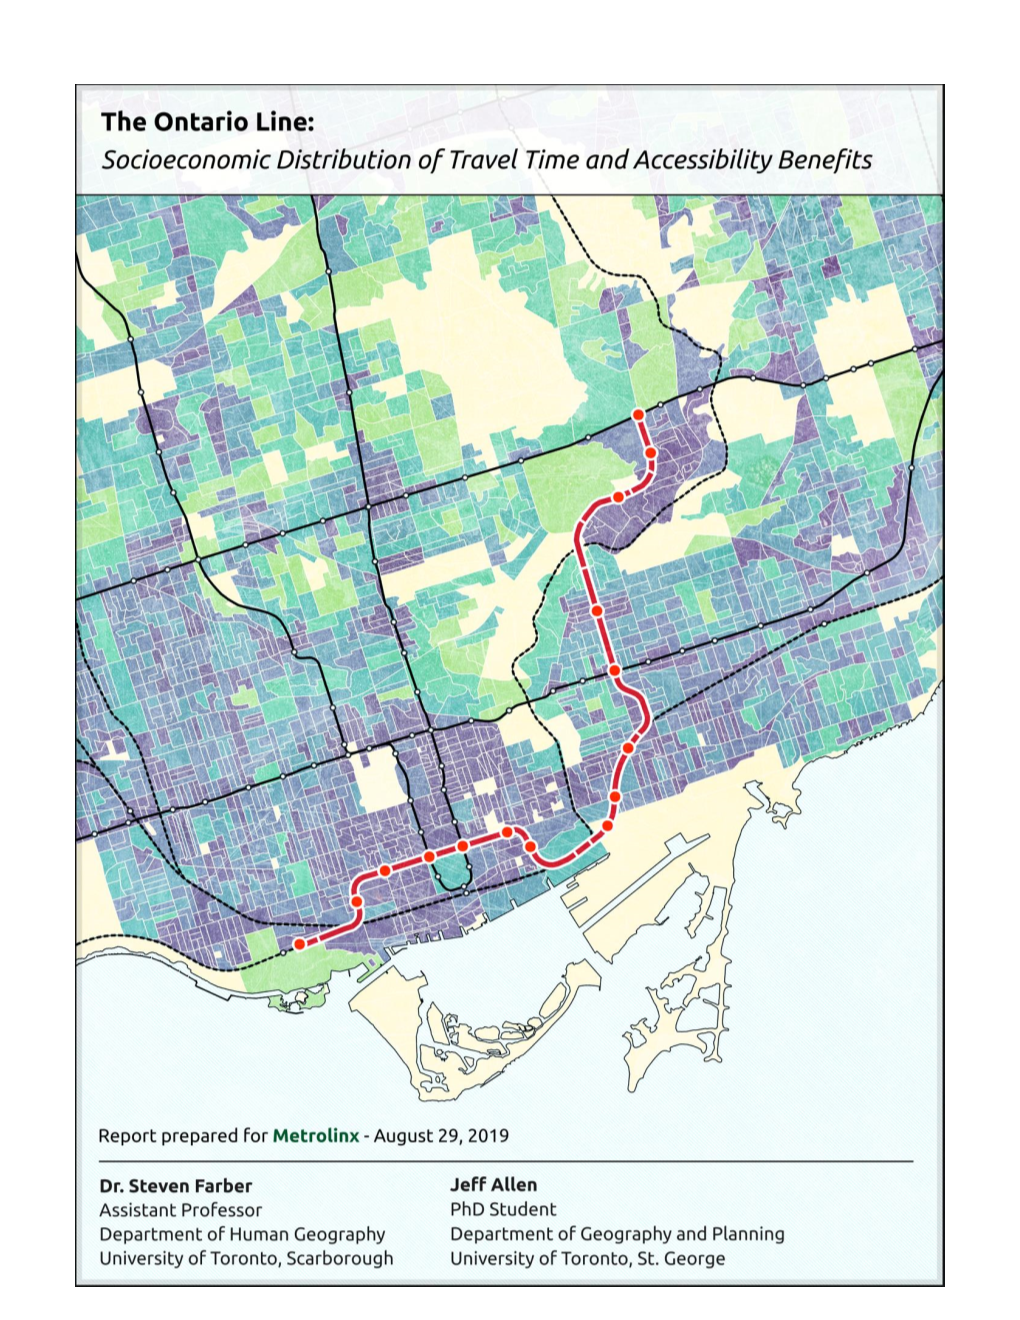 The Ontario Line: Socioeconomic Distribution of Travel Time and Accessibility Benefits 1 Dr